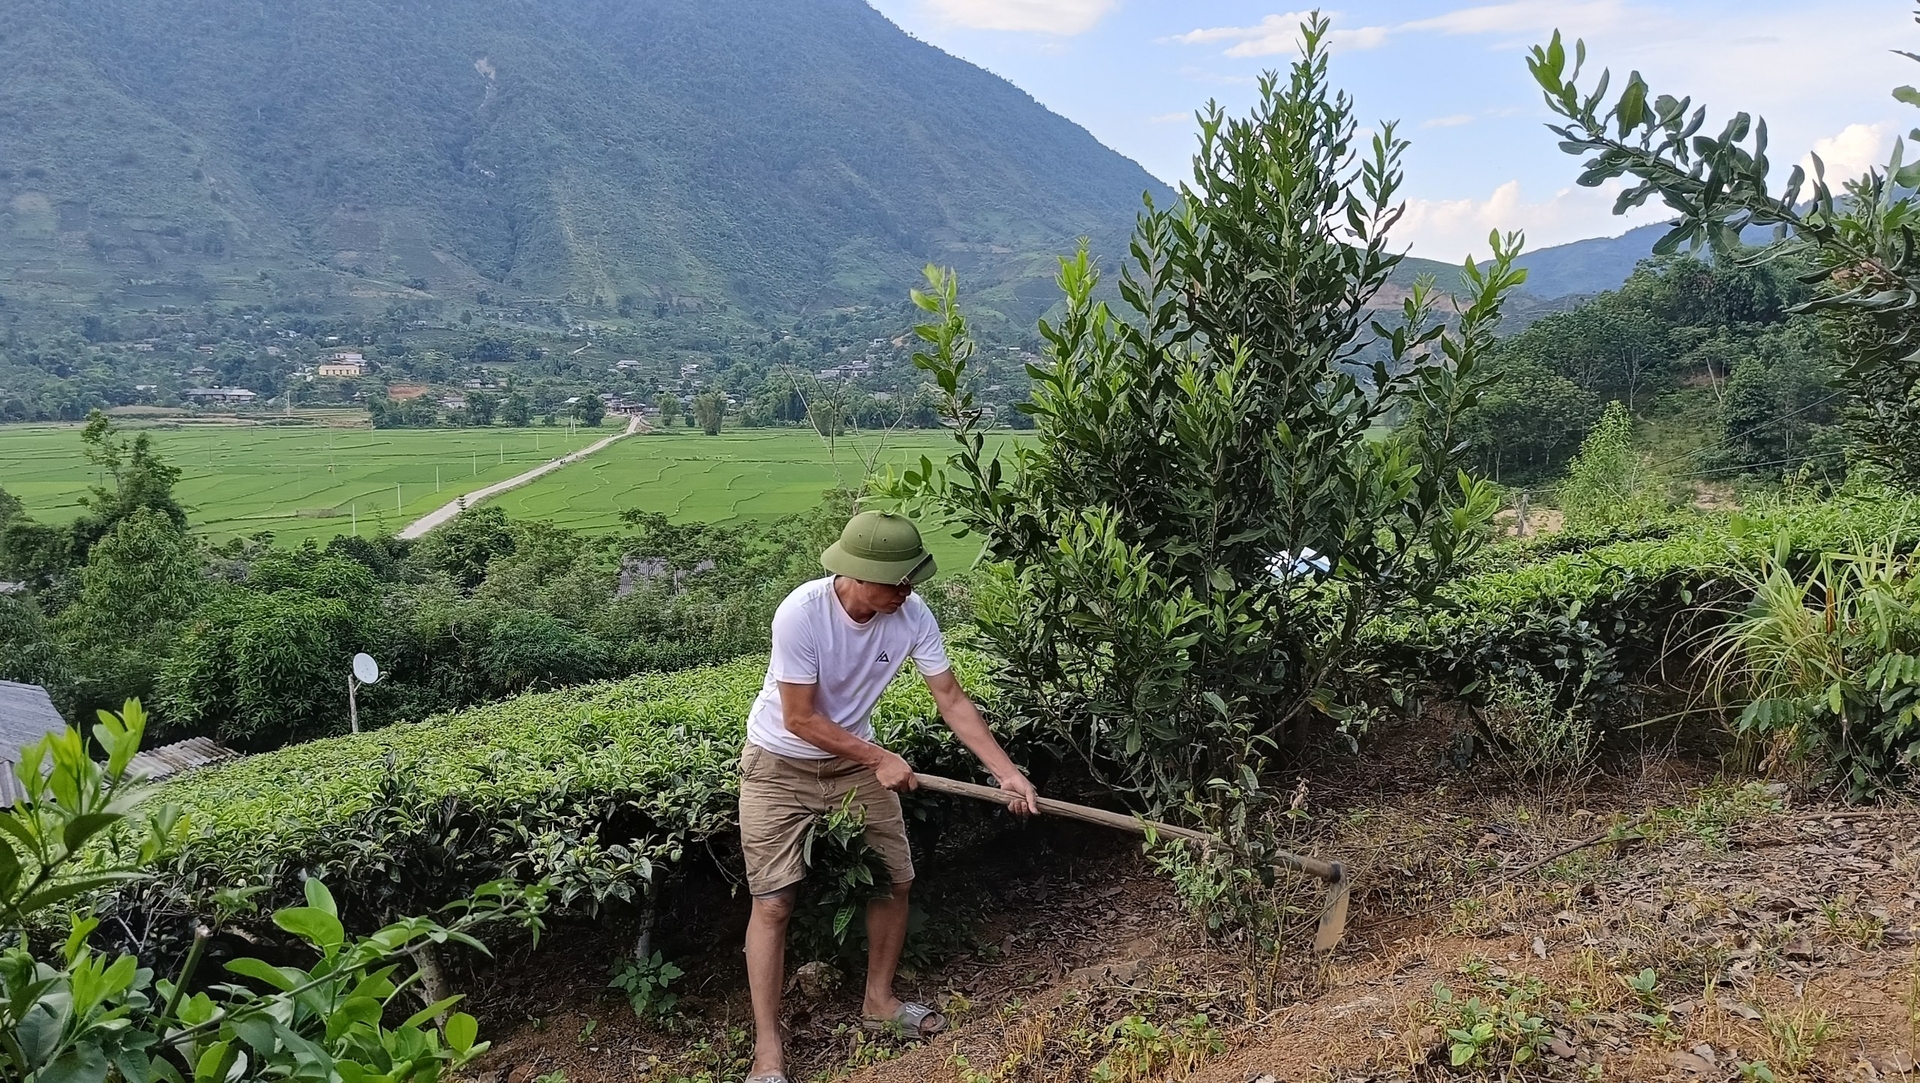 The macadamia tree is promising and marketable. However, farmers should not spontaneously grow macadamia without appropriate ecological assessment and no basis for affirming its effectiveness. Photo: Kien Trung.